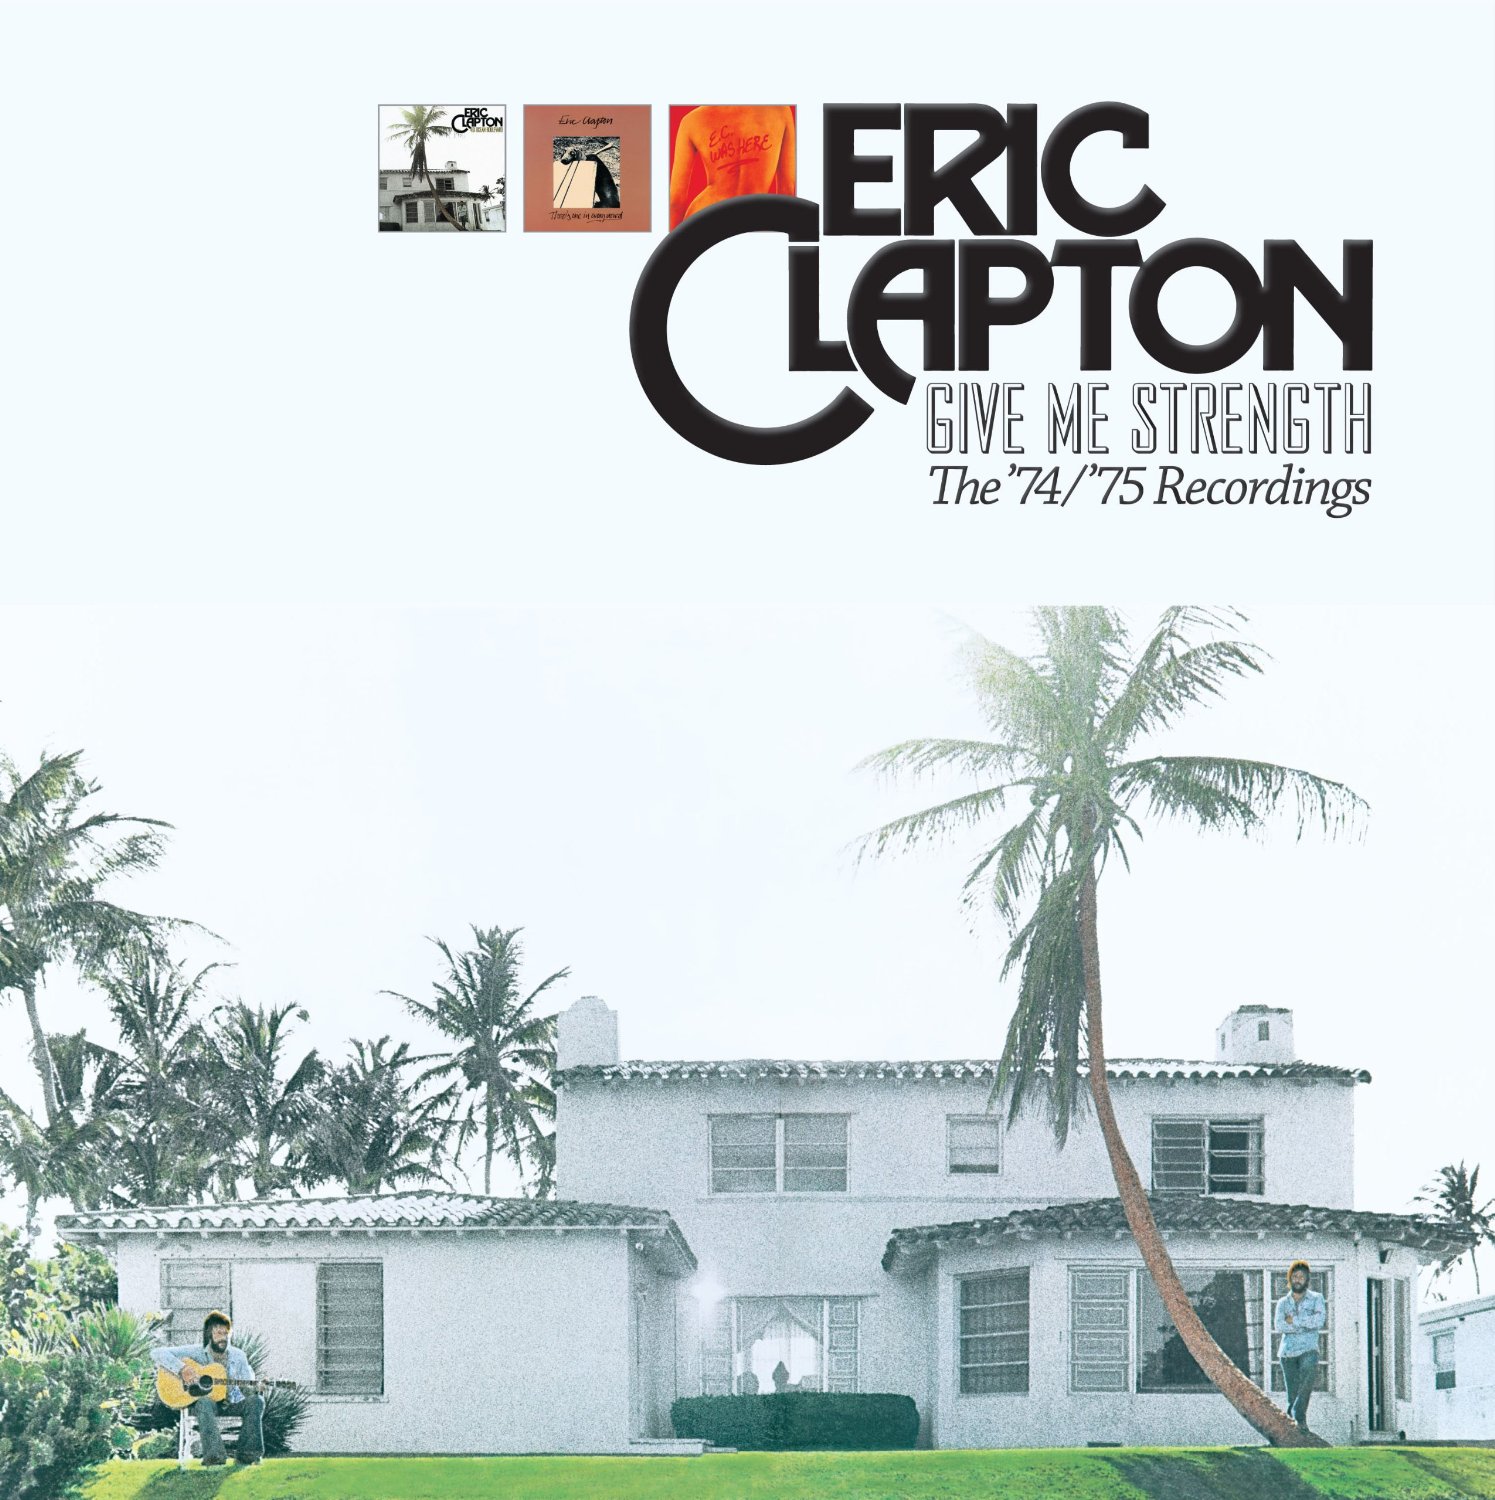 Eric Clapton - Give Me Strength: The '74 / '75 Recordings